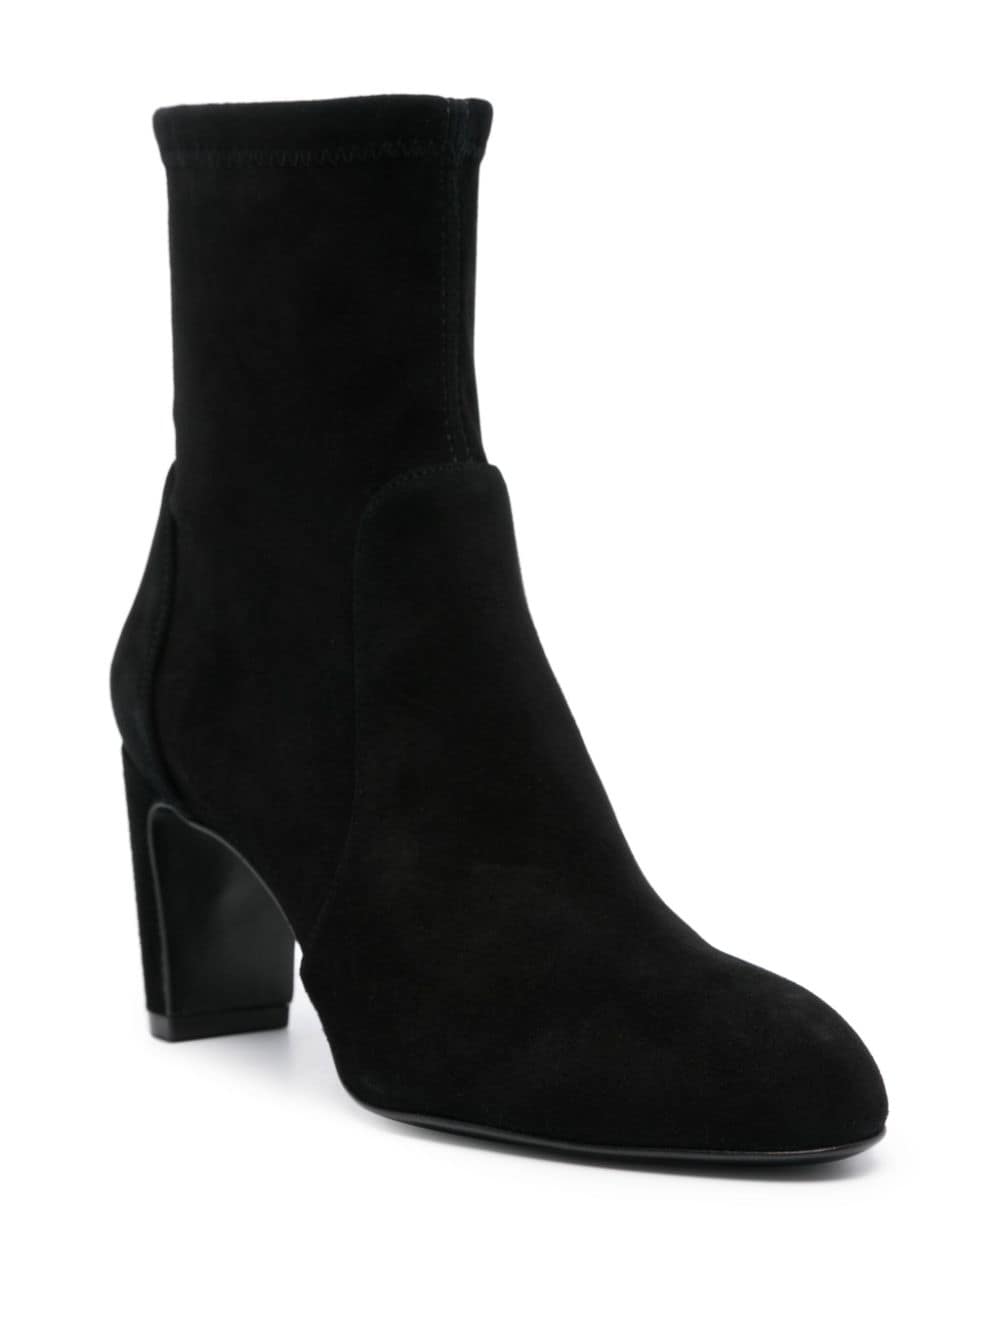 Image 2 of Stuart Weitzman 85mm suede ankle boots